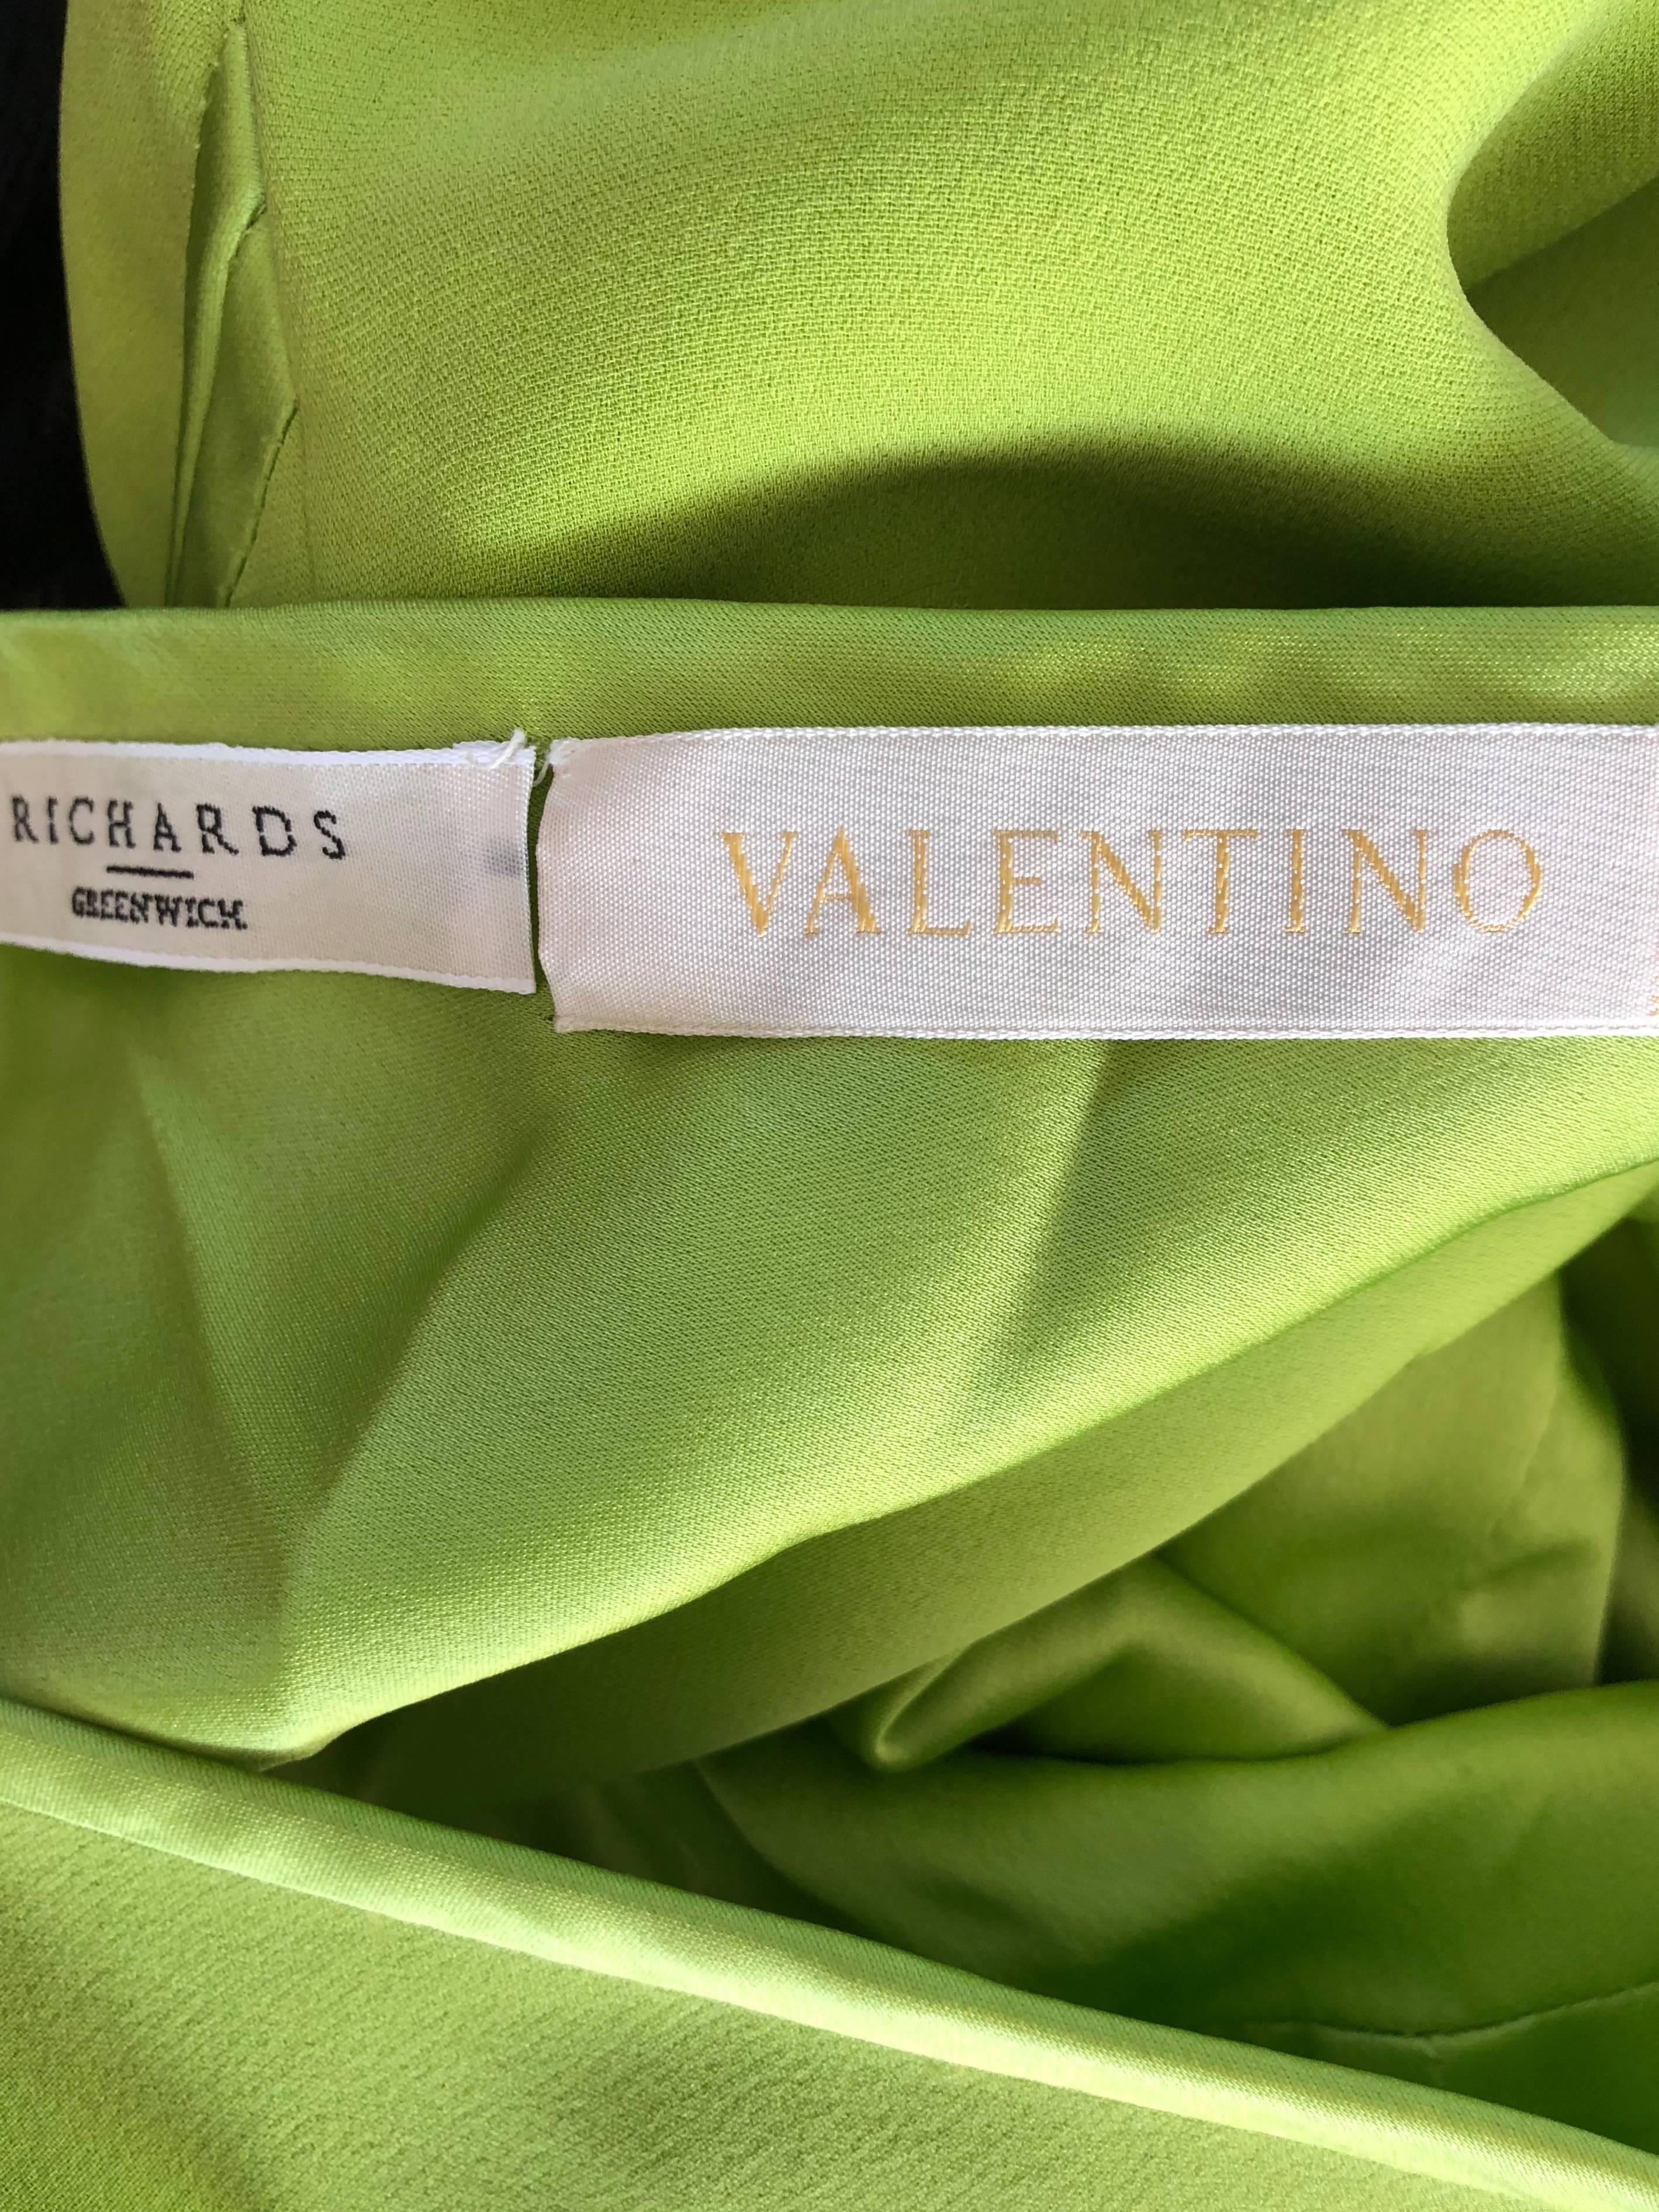 Sexy never worn late 1990s lime neon green silk VALENTINO cut-out dress! Features a flattering bodcon silhouette that stretches to fit. Per-tied bows up the bodice tiered with cut-outs to reveal just the right amount of skin. Wonderfully made, with